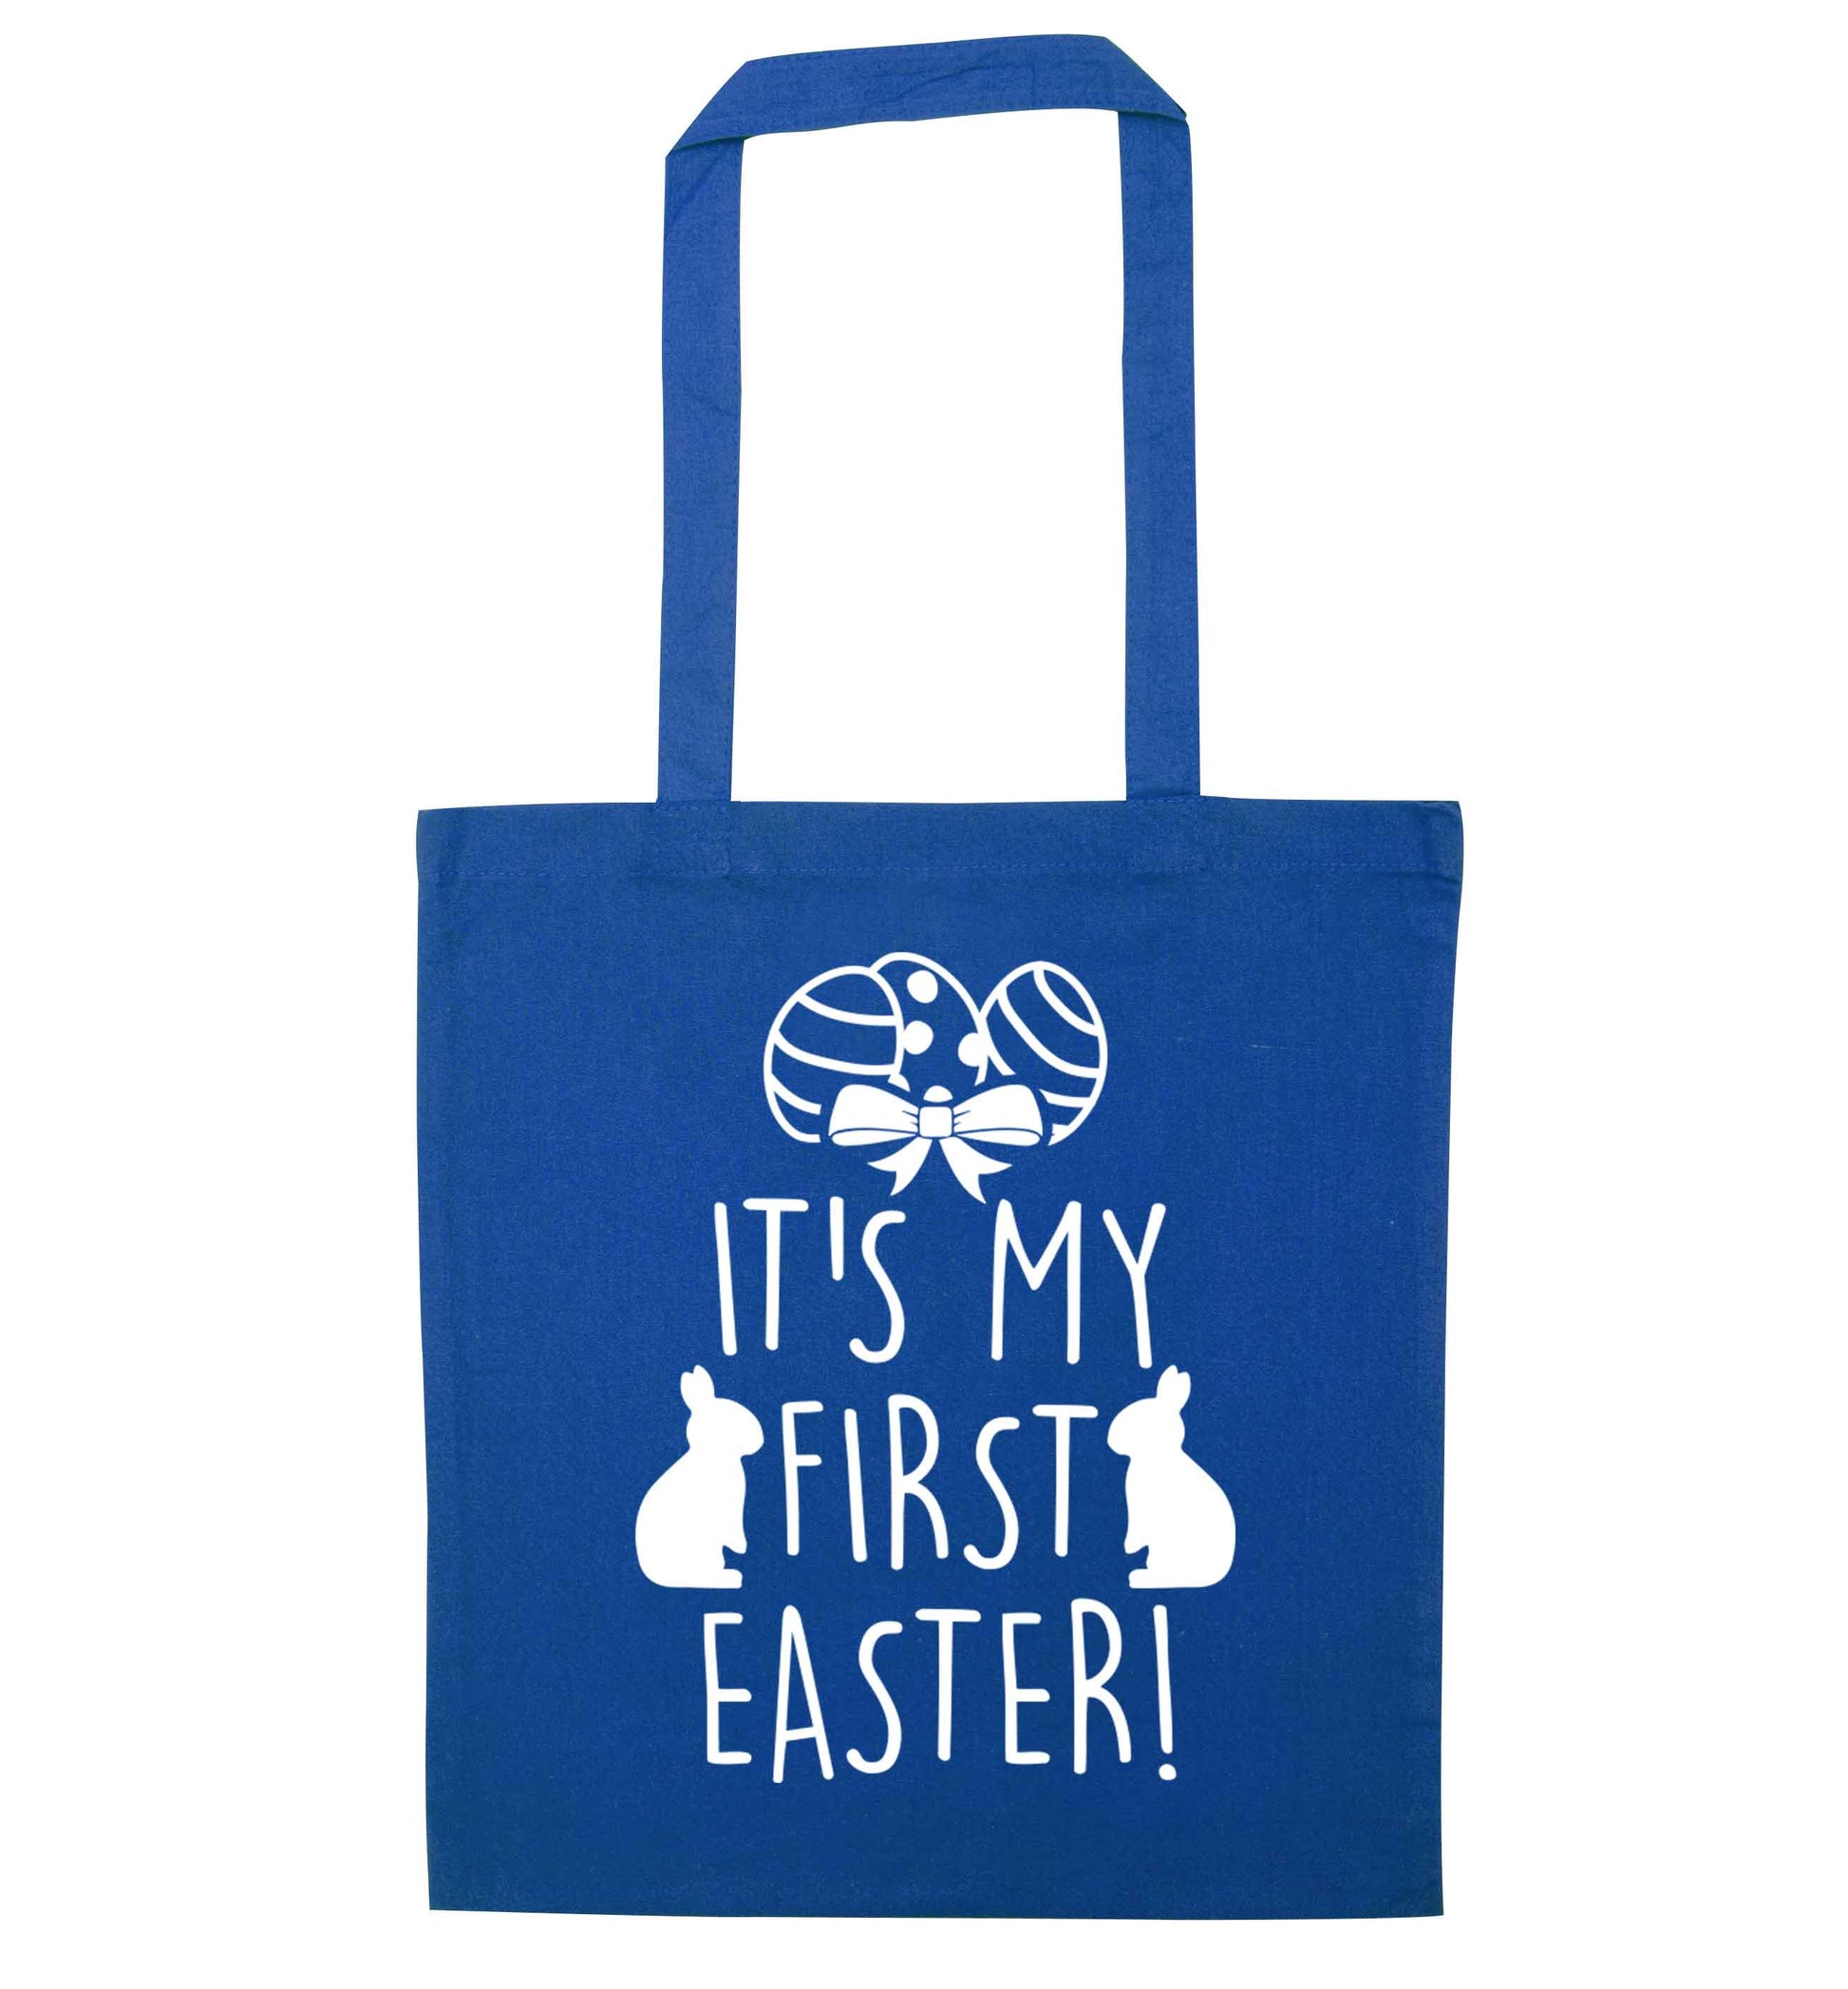 It's my first Easter blue tote bag